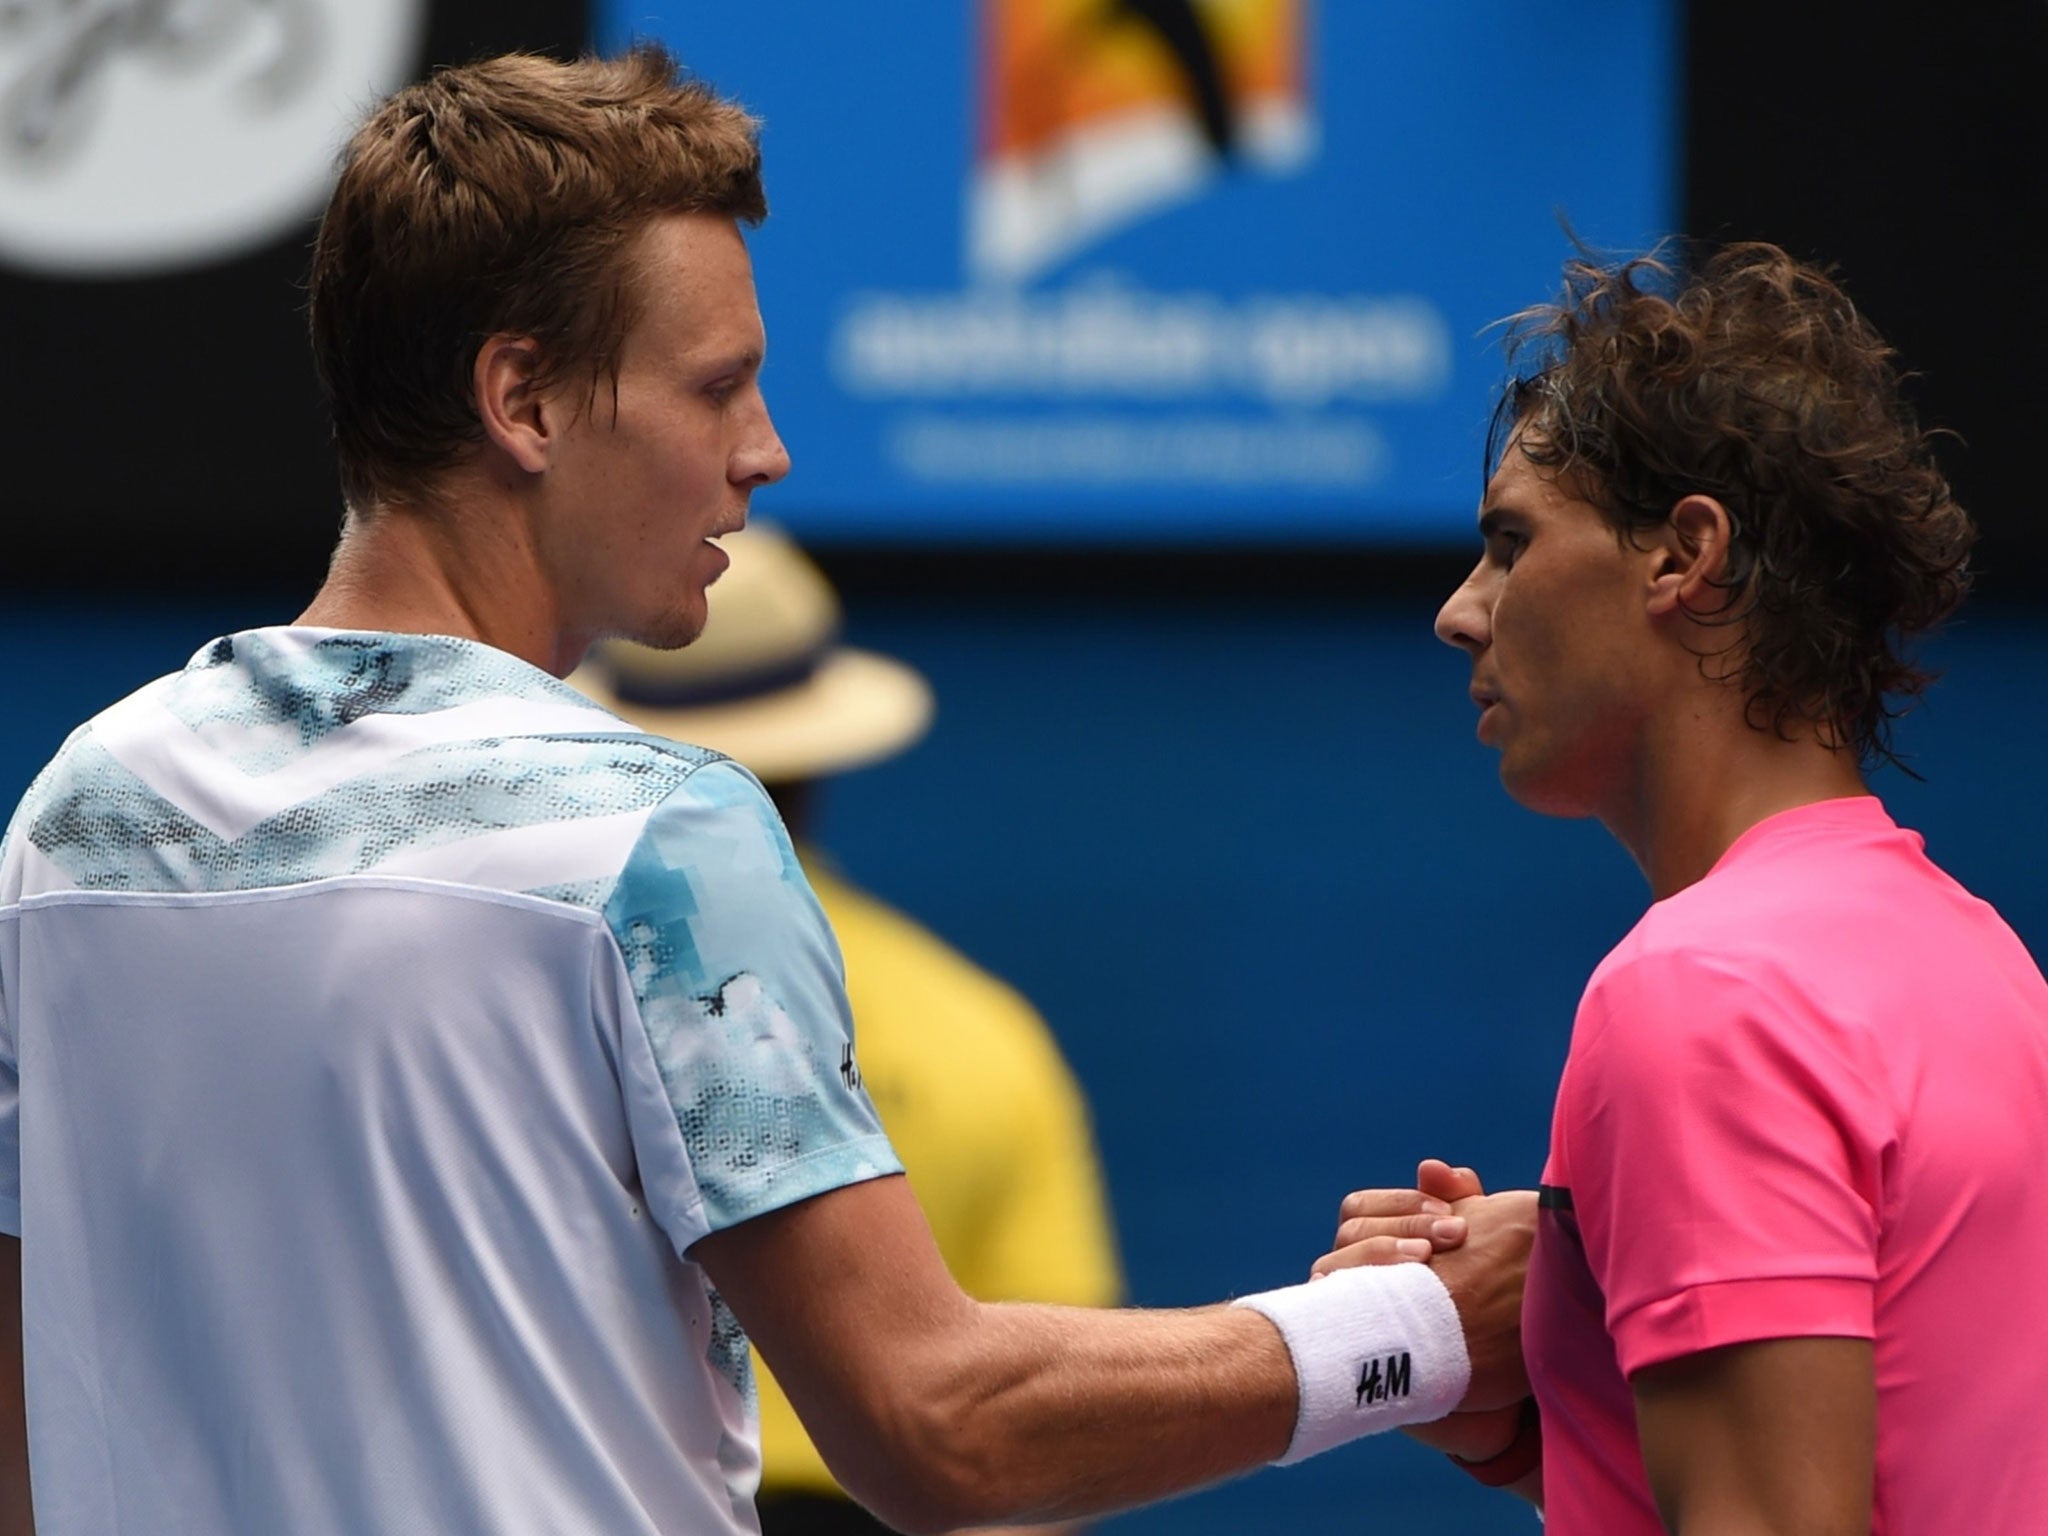 Tomas Berdych shakes hands with Rafael Nadal after knocking the Spaniard out of the Australian Open